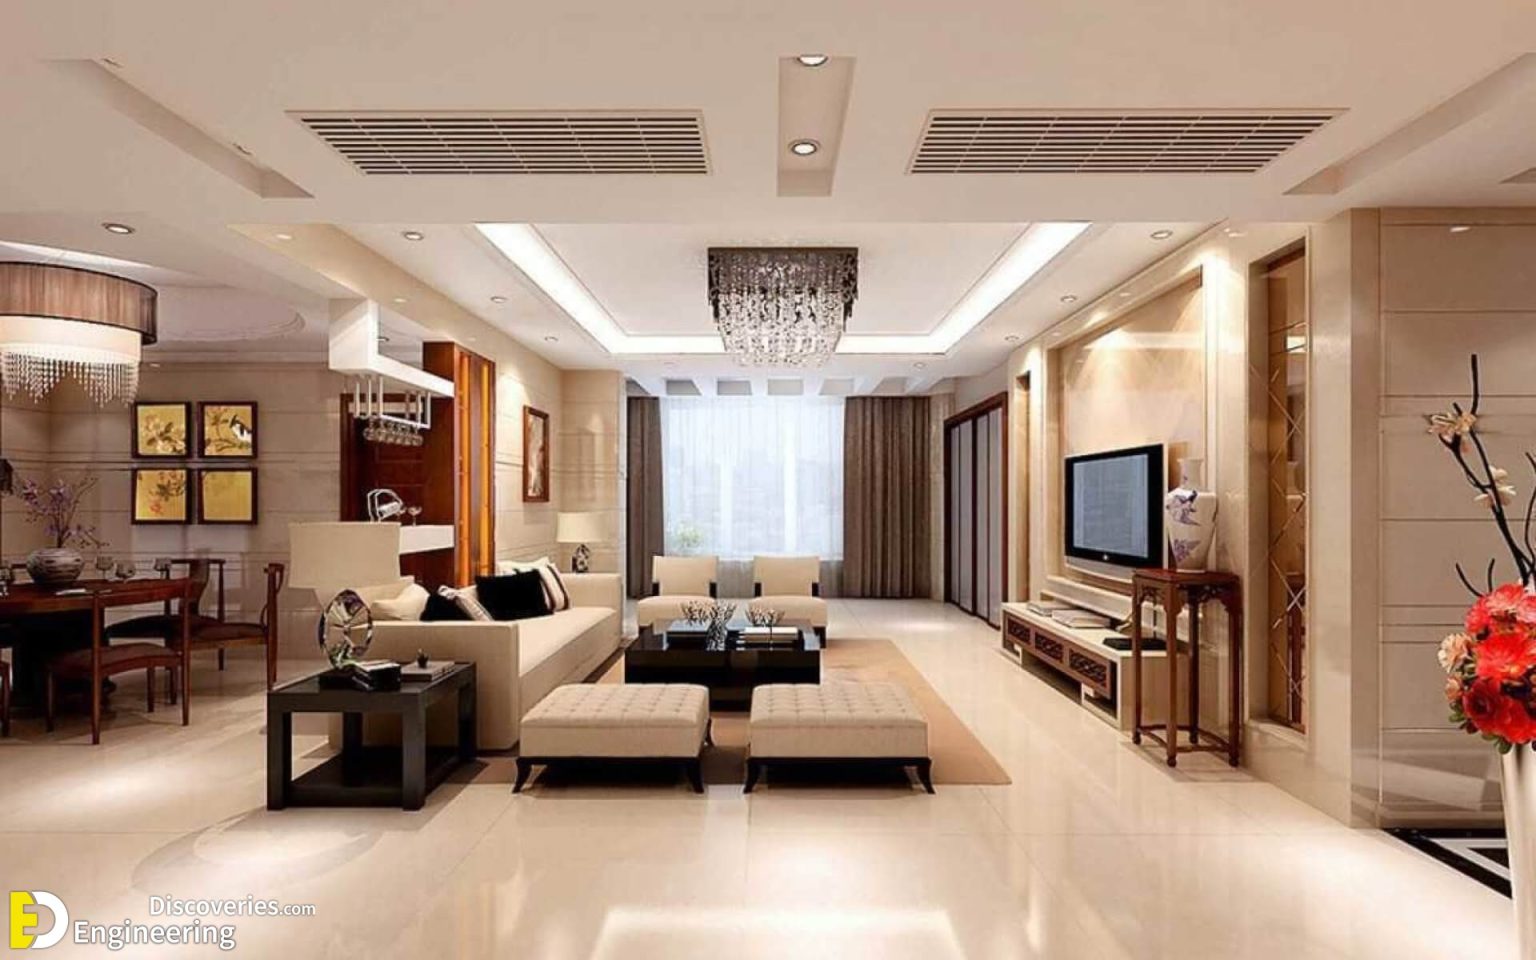 Modern Chinese Inspired Living Room Ideas!! | Engineering Discoveries